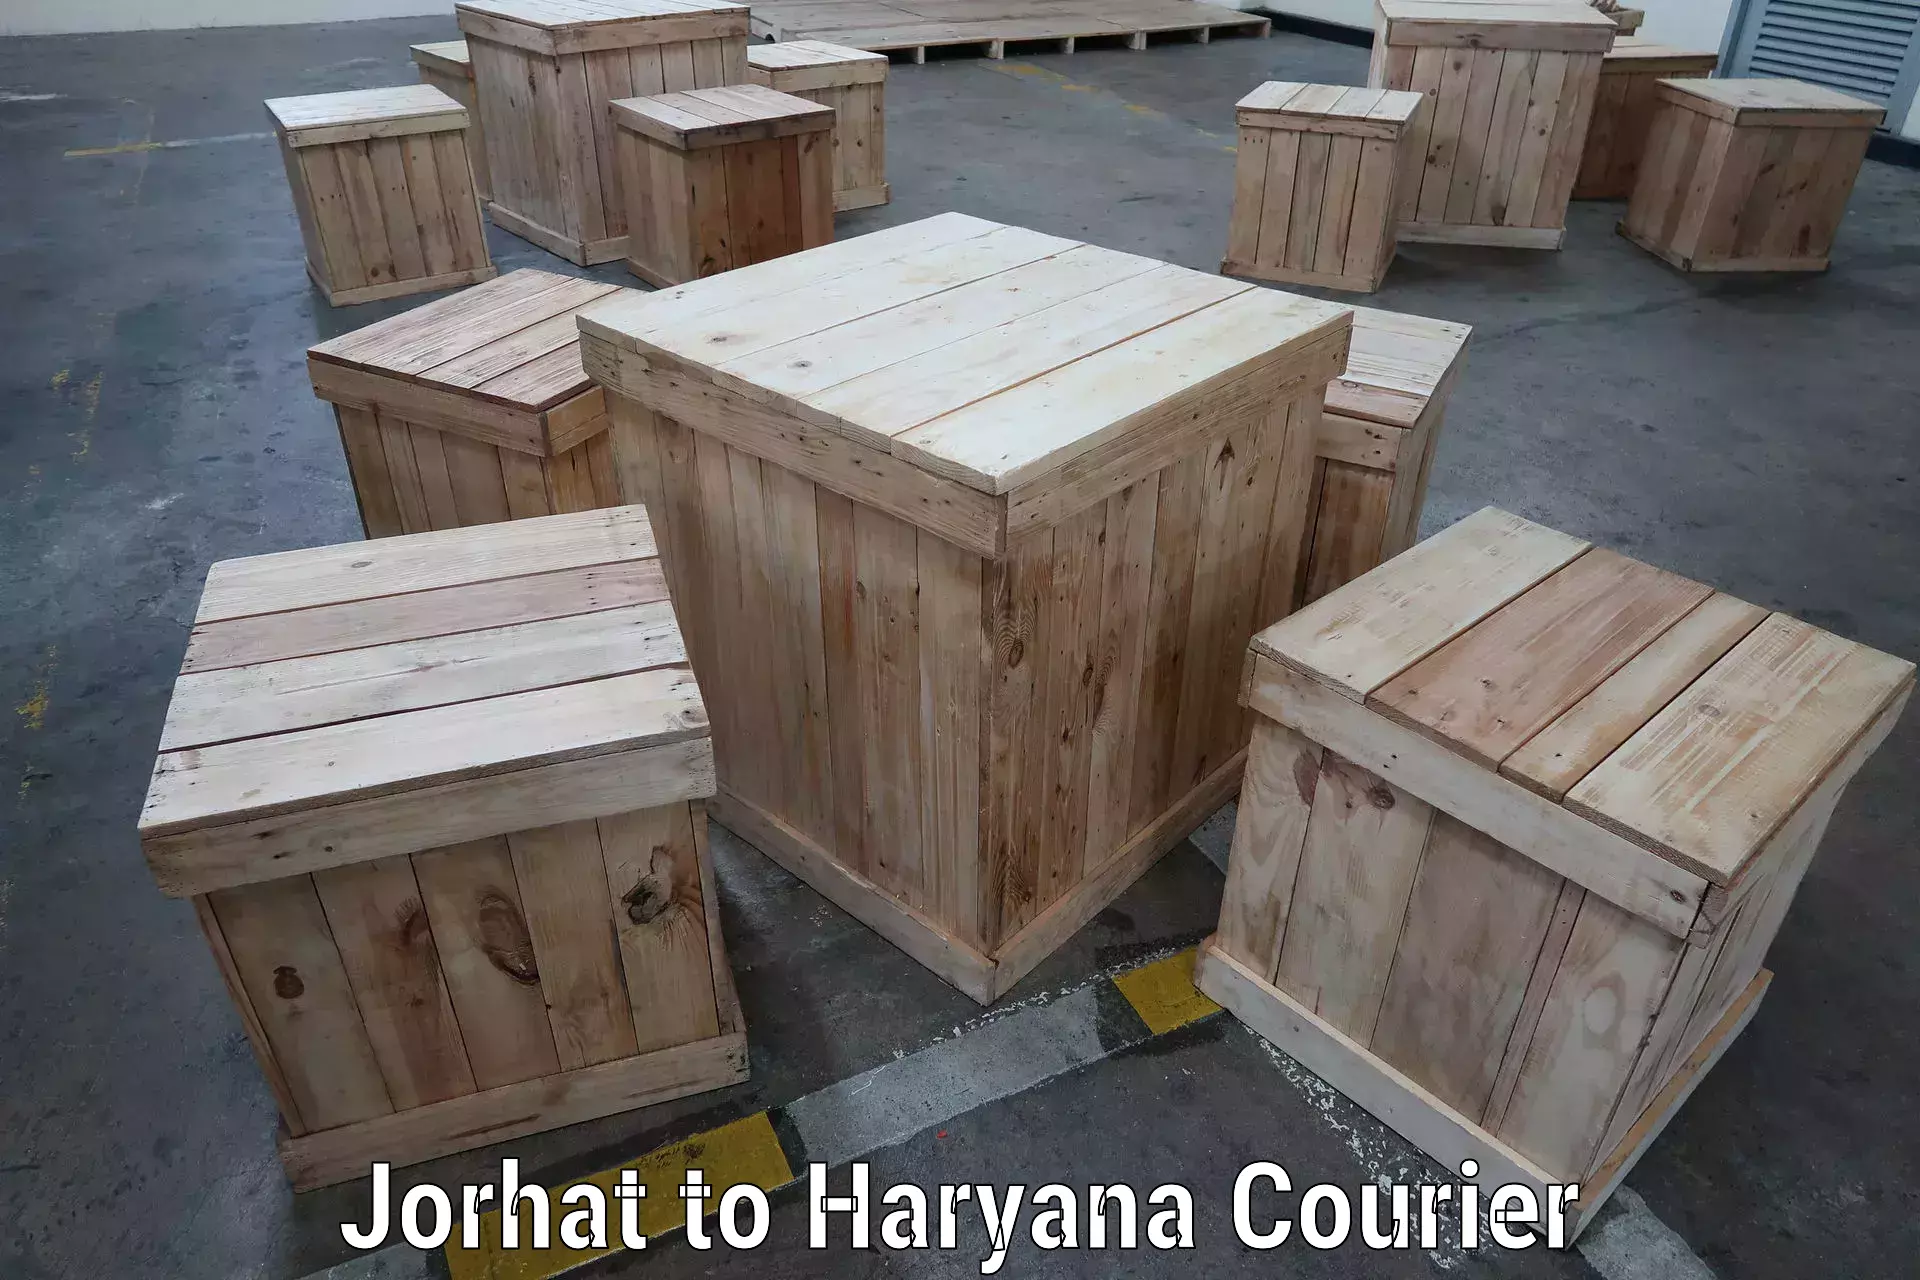 Cargo delivery service Jorhat to Haryana